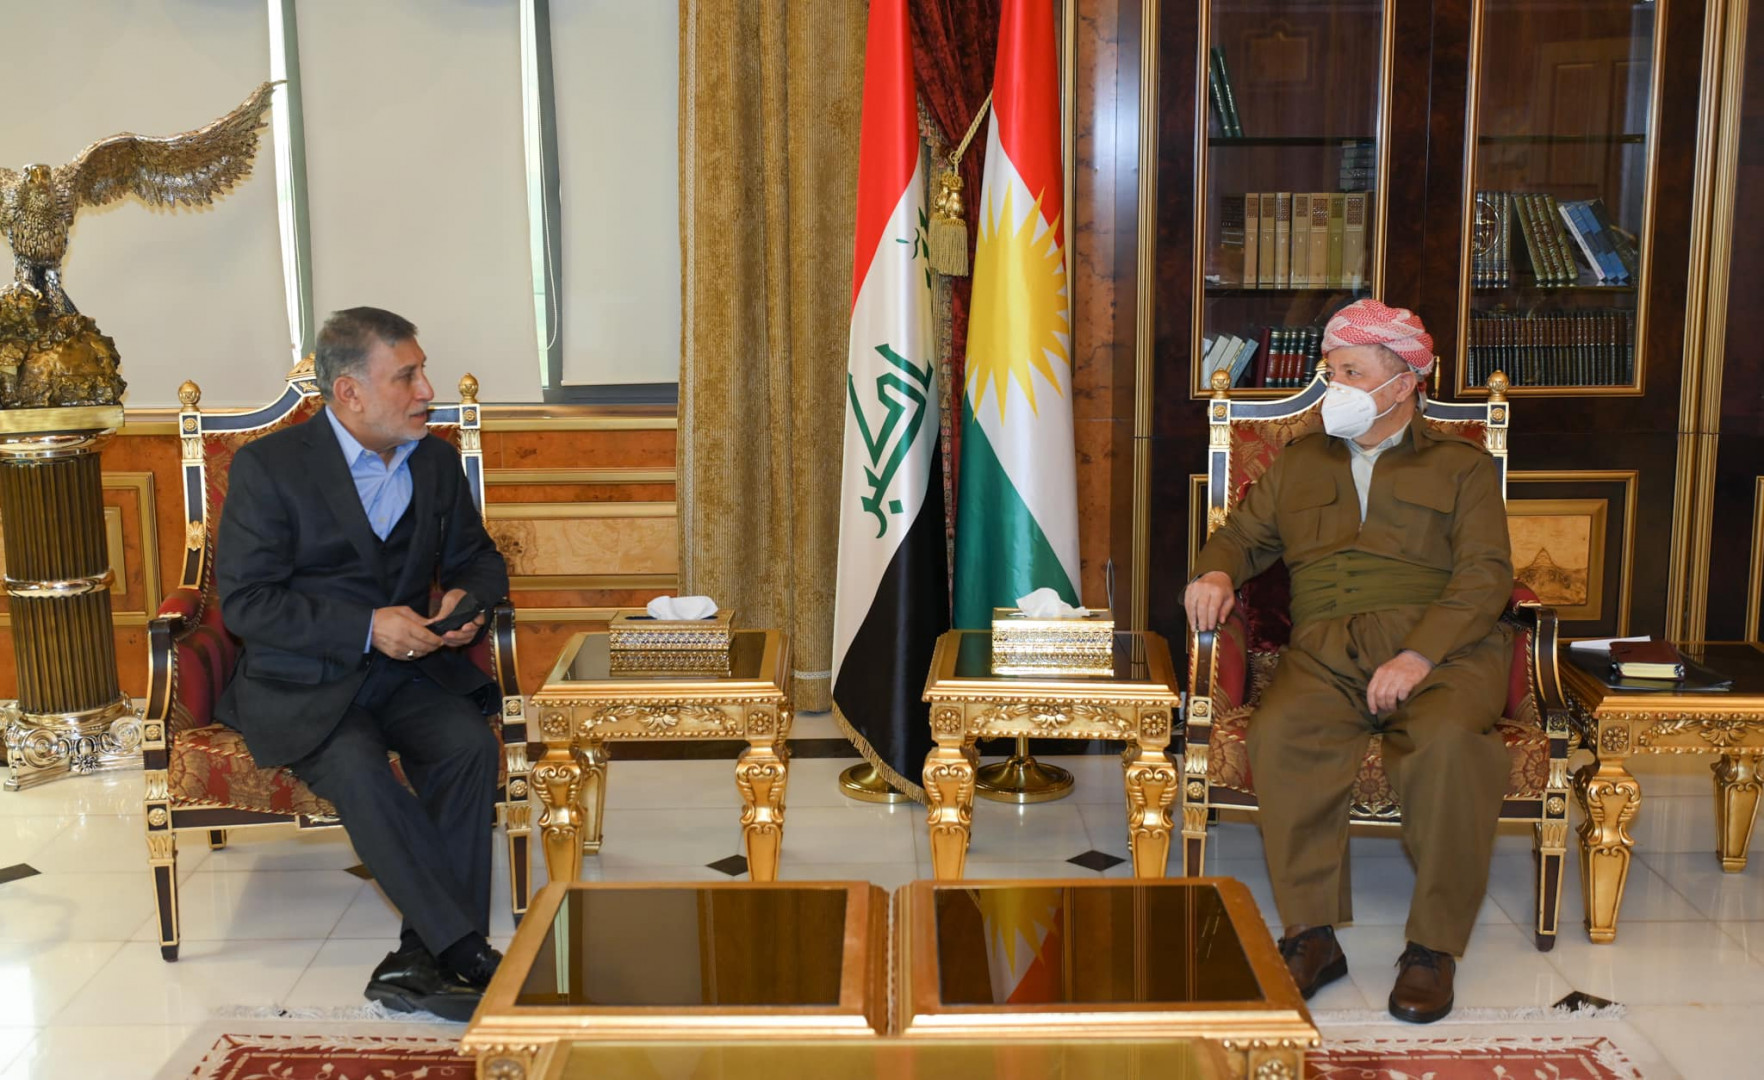 Masoud Barzani discusses the election results with Ezzat Shabender 